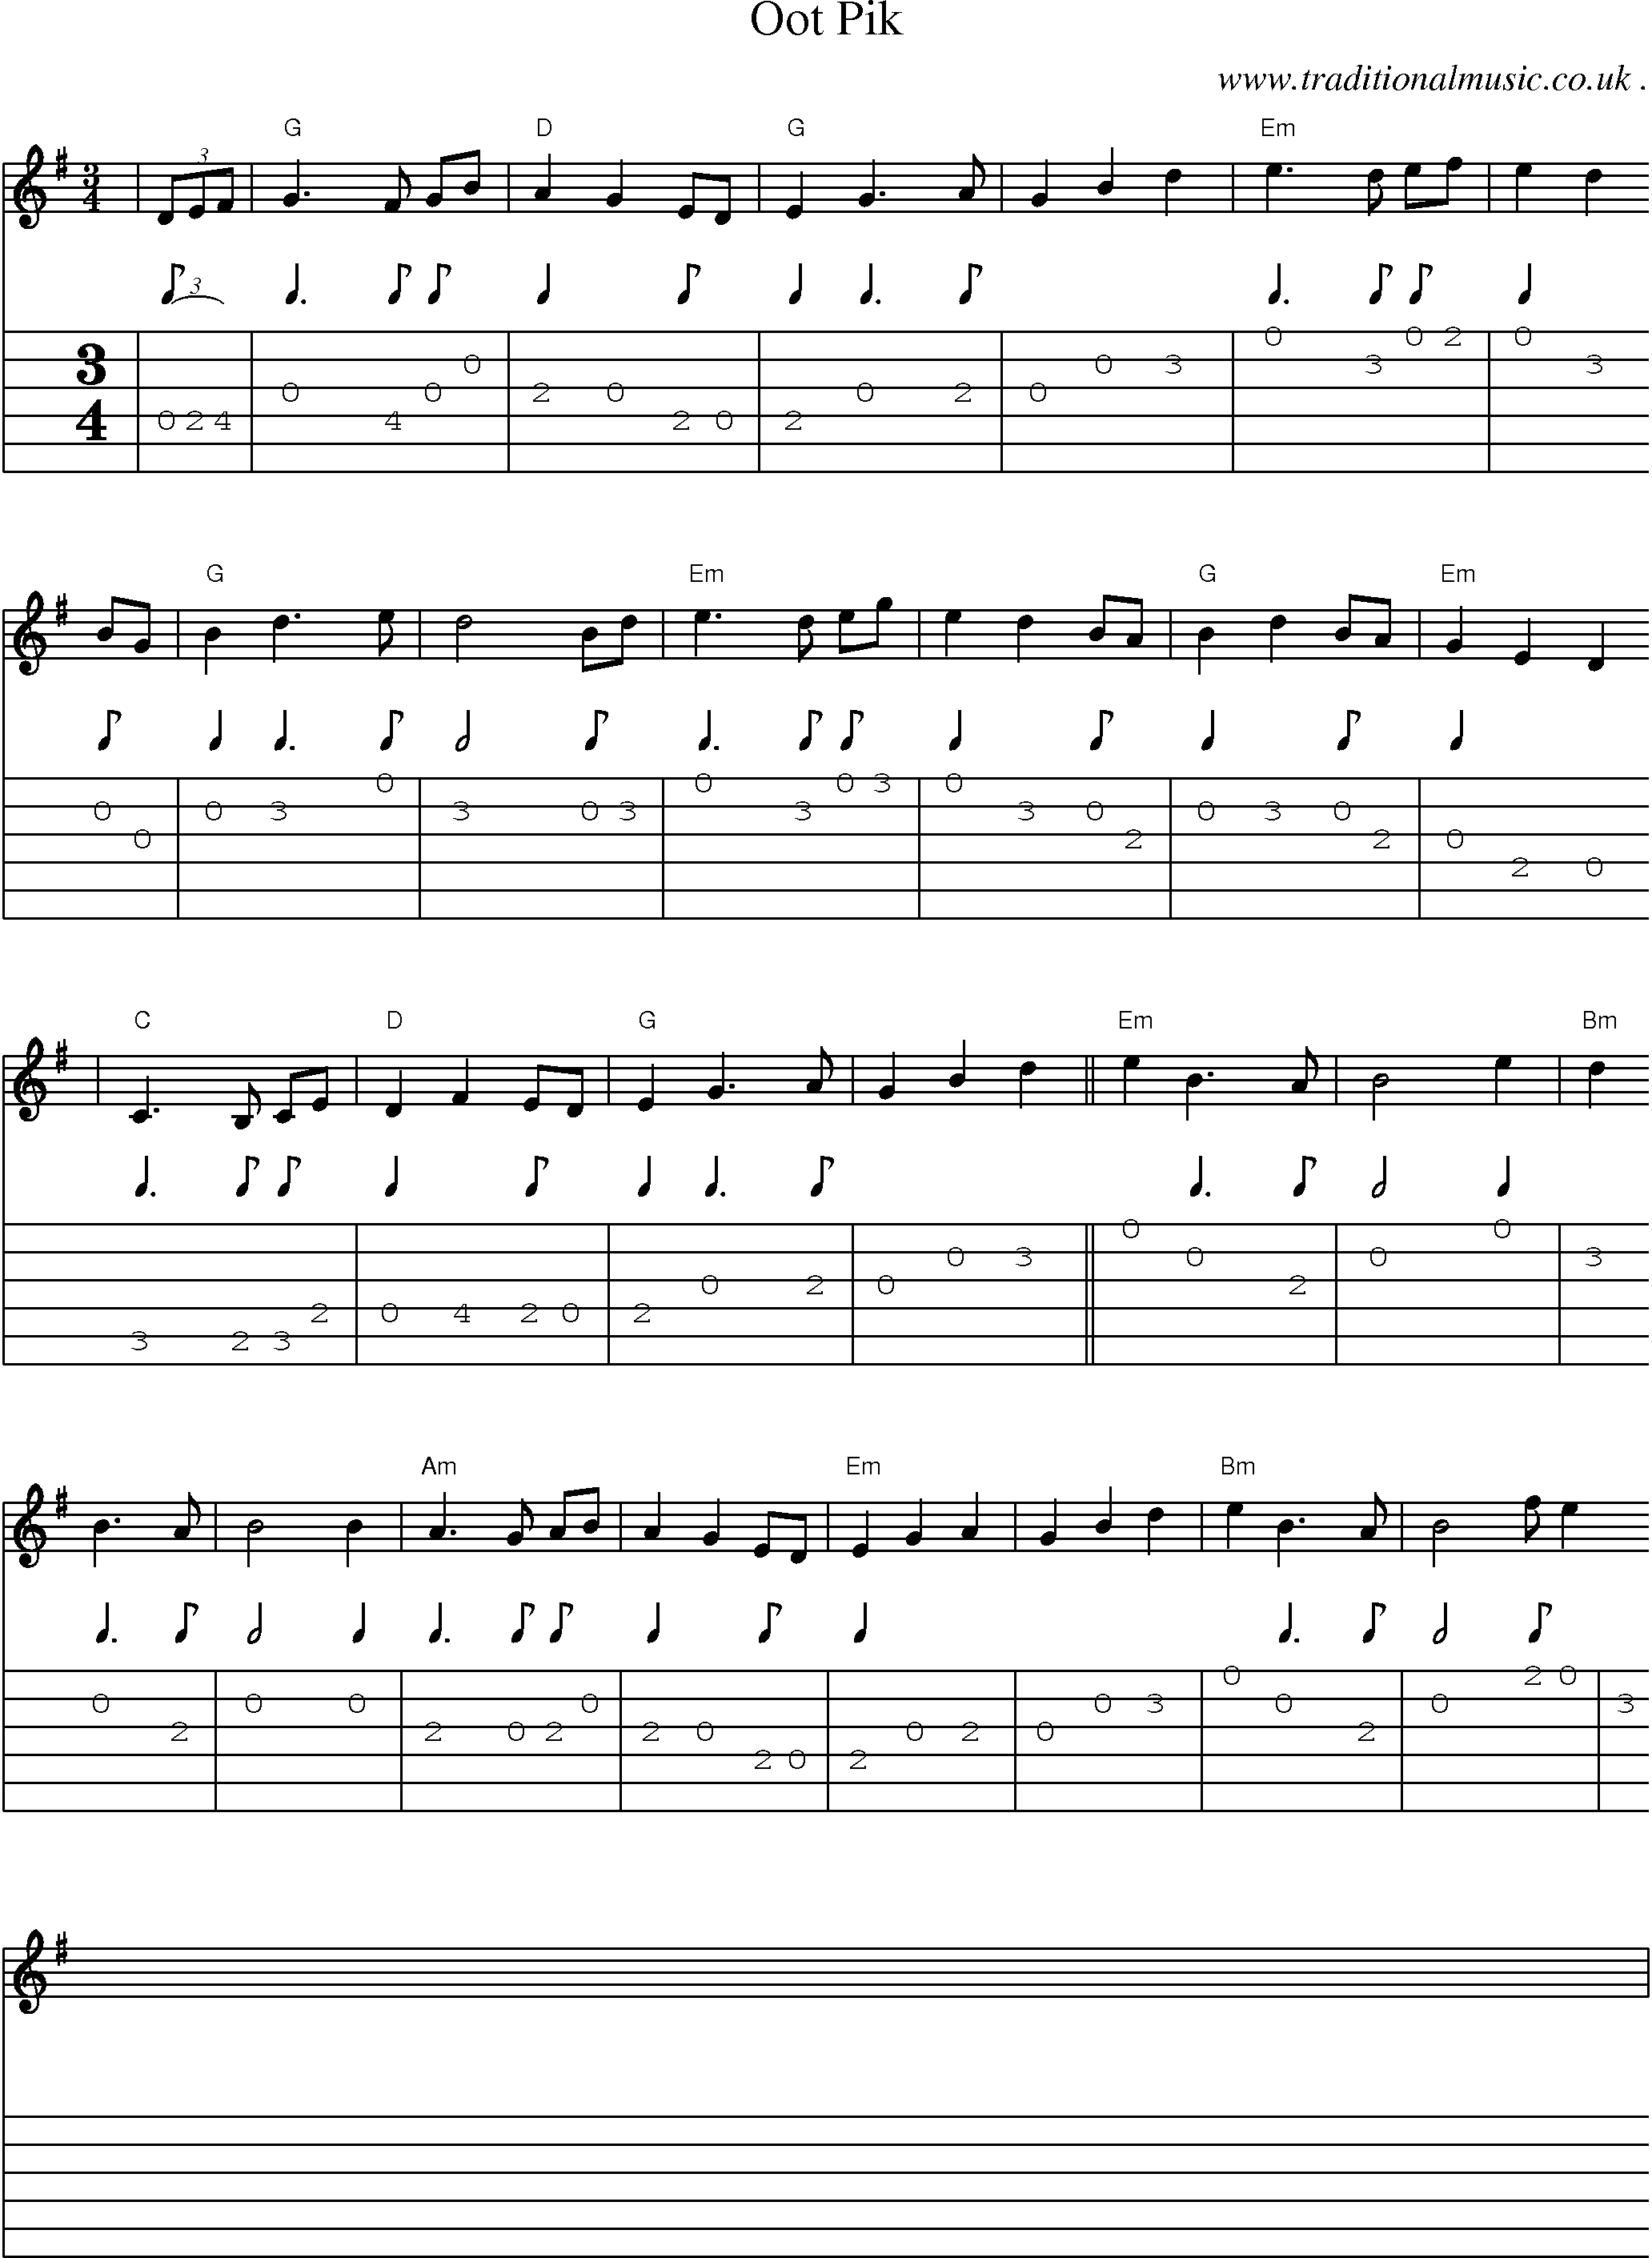 Sheet-Music and Guitar Tabs for Oot Pik